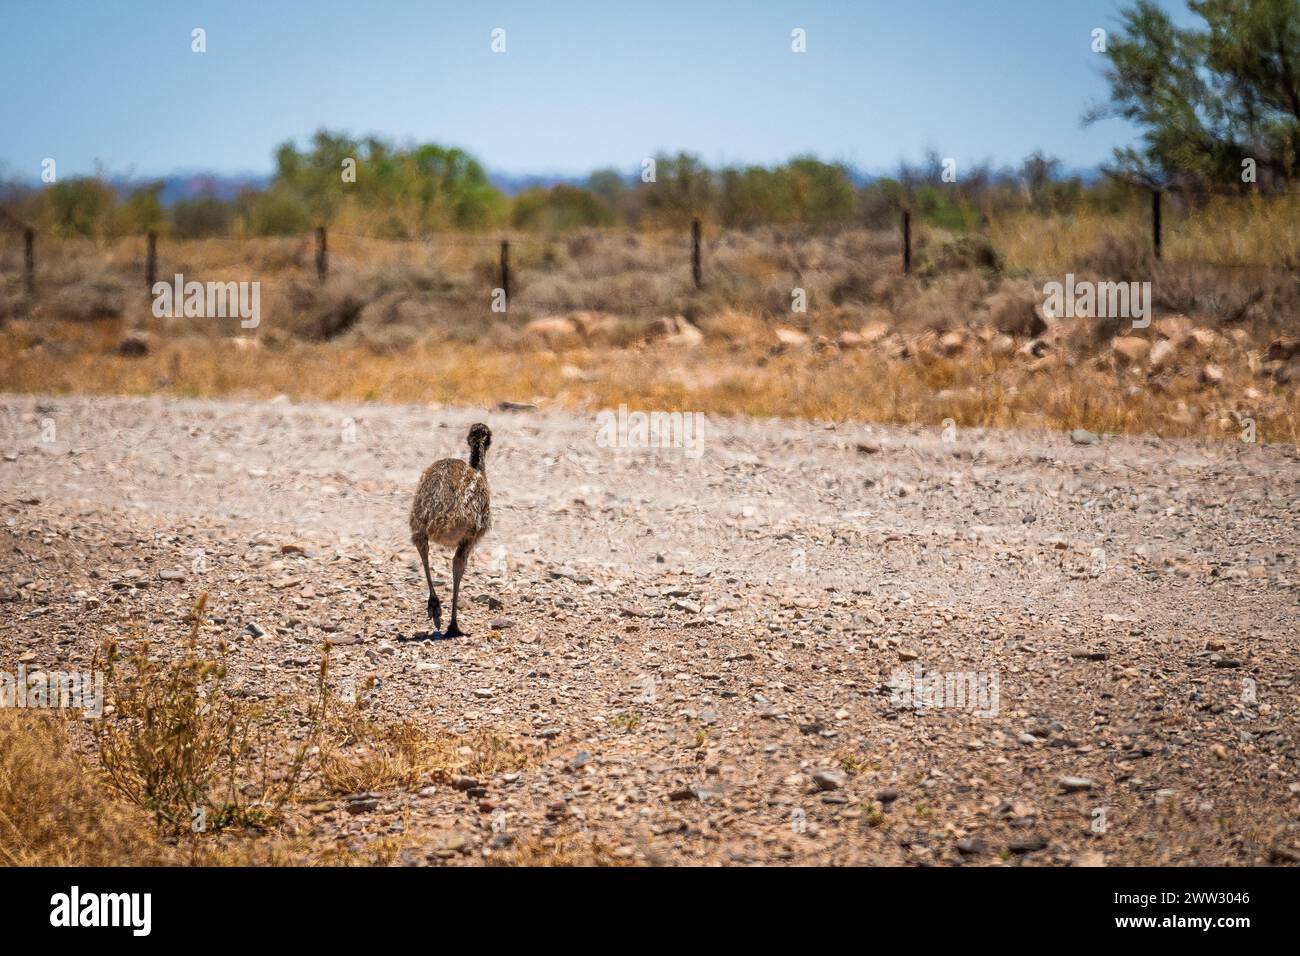 An emu's retreat into the bush, a scene of wildlife in the Australian outback. Stock Photo